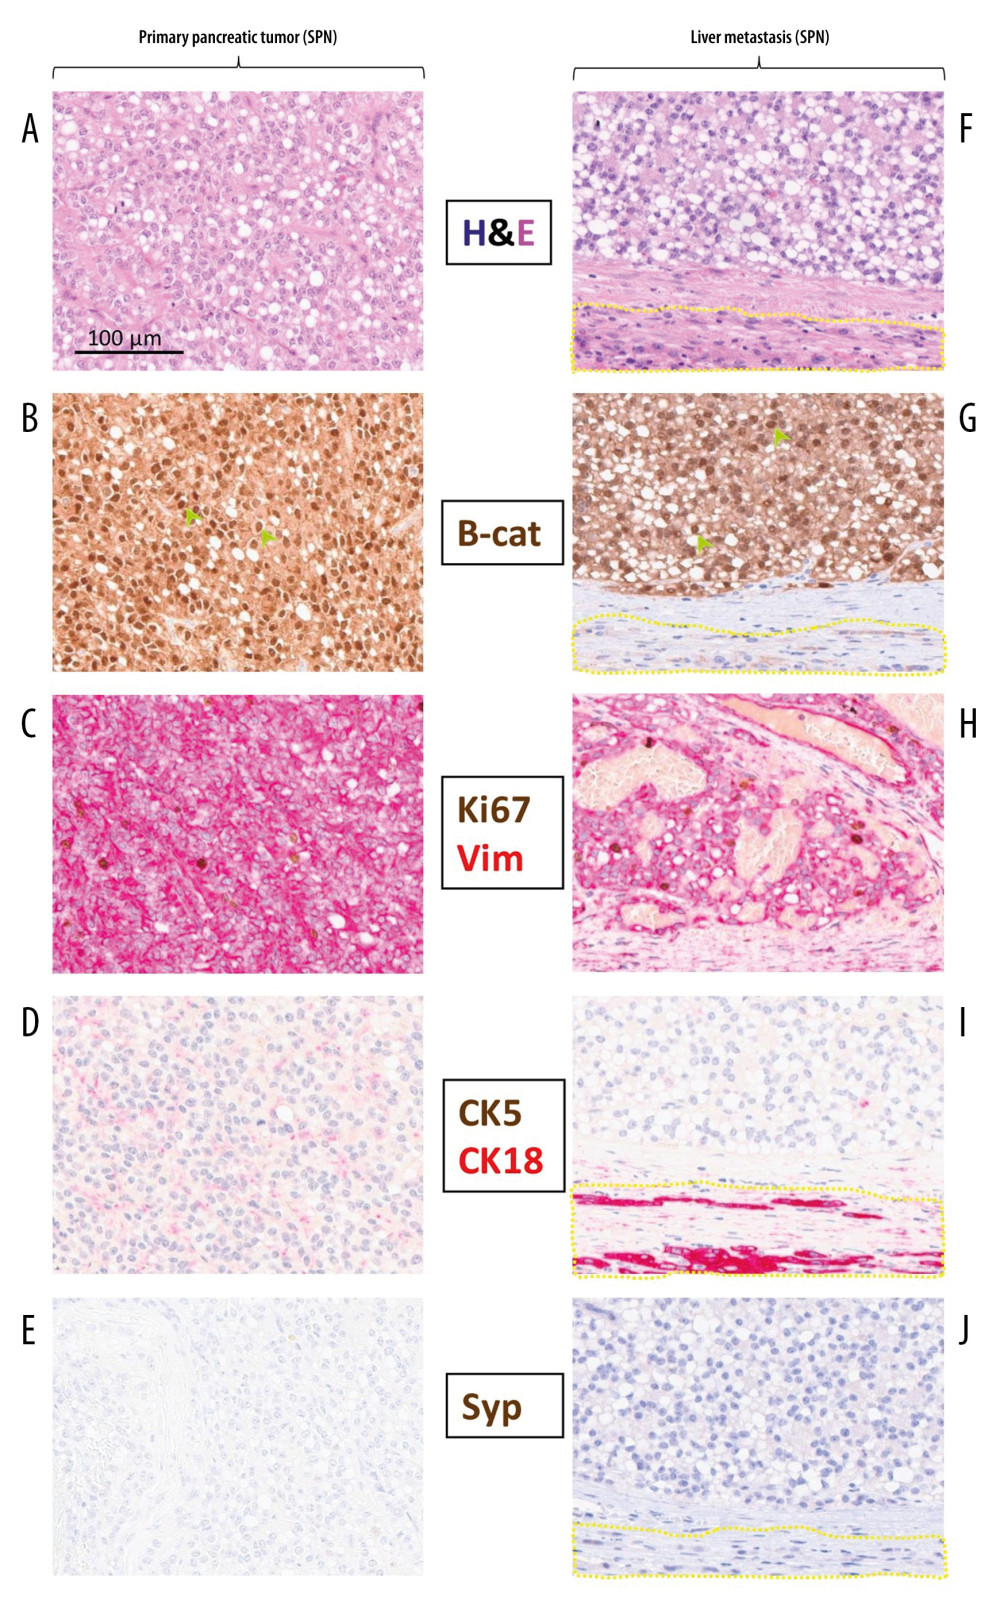 (A, F) Histology of primary and liver metastasis of solid pseudopapillary neoplasm of the pancreas on hematoxylin and eosin (H&E) staining. The photomicrographs show monomorphic epithelial cells with vacuolated cytoplasm in solid sheets. (B–E, G–J) Immunohistochemical staining demonstrates the characteristic profile of solid pseudopapillary neoplasm of the pancreas: beta-catenin (B-cat: nuclear and cytoplasmic positivity), vimentin (Vim: positive), cytokeratins (CK18, CK5: negative), synaptophysin (Syp: negative). Text colors correspond to the staining chromogens. Yellow dotted area (F, G, I, J) indicates atrophic peritumoral hepatocytes. Green arrows (B, G) indicate beta-catenin+tumor cell nuclei.